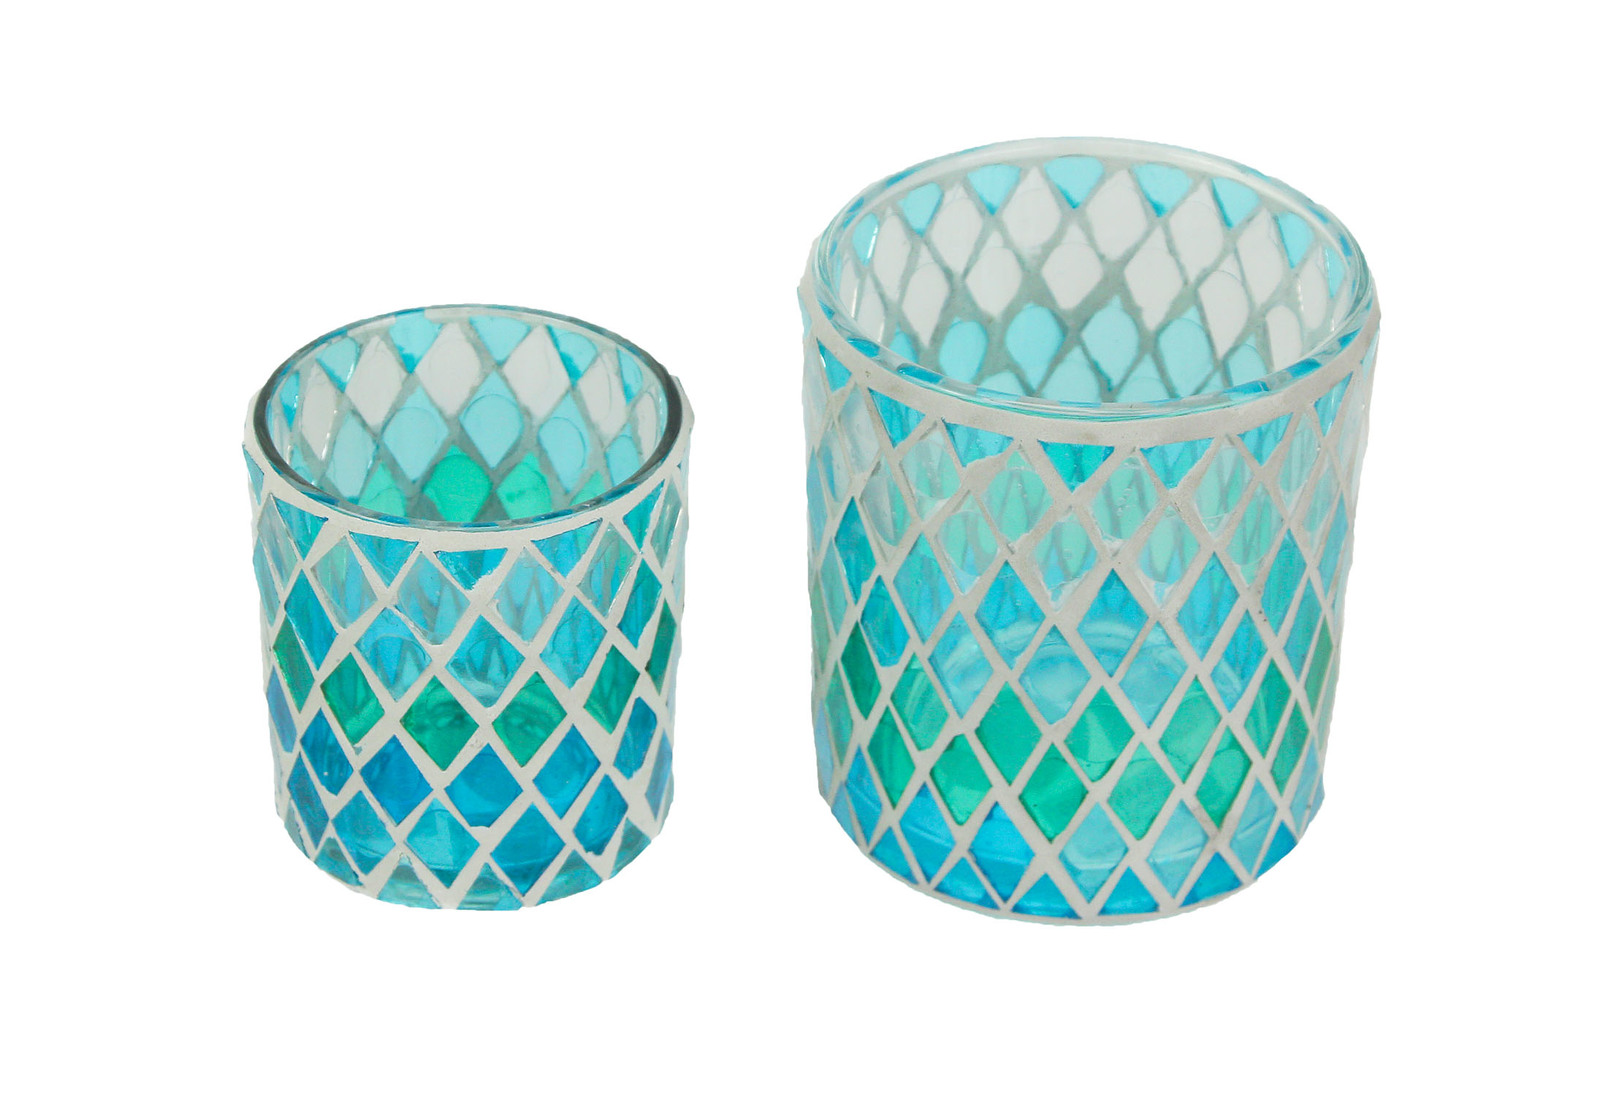 Set of 2 Coastal Blue Green Mosaic Glass Candle Holders Beach Decor Accent - $26.72